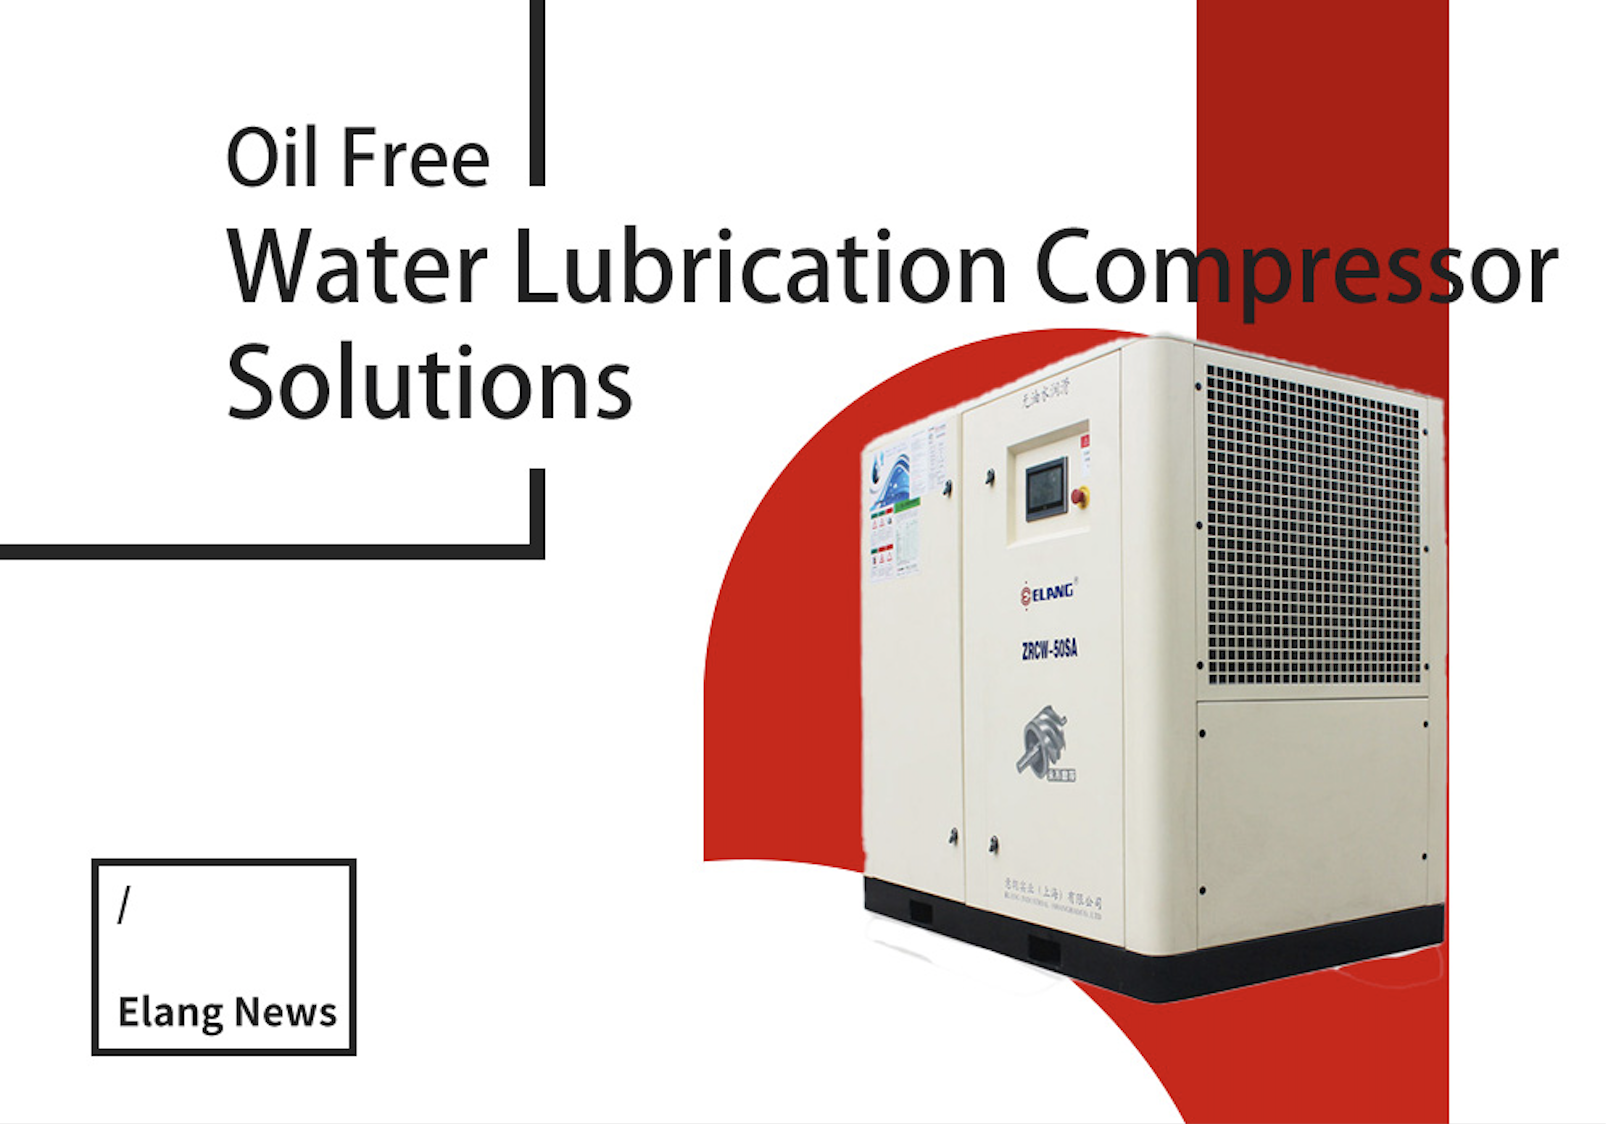 Elang Oil Free Water Lubrication Compressor Air Solutions Fully Contribute to the Development of the Pharmaceutical Industry